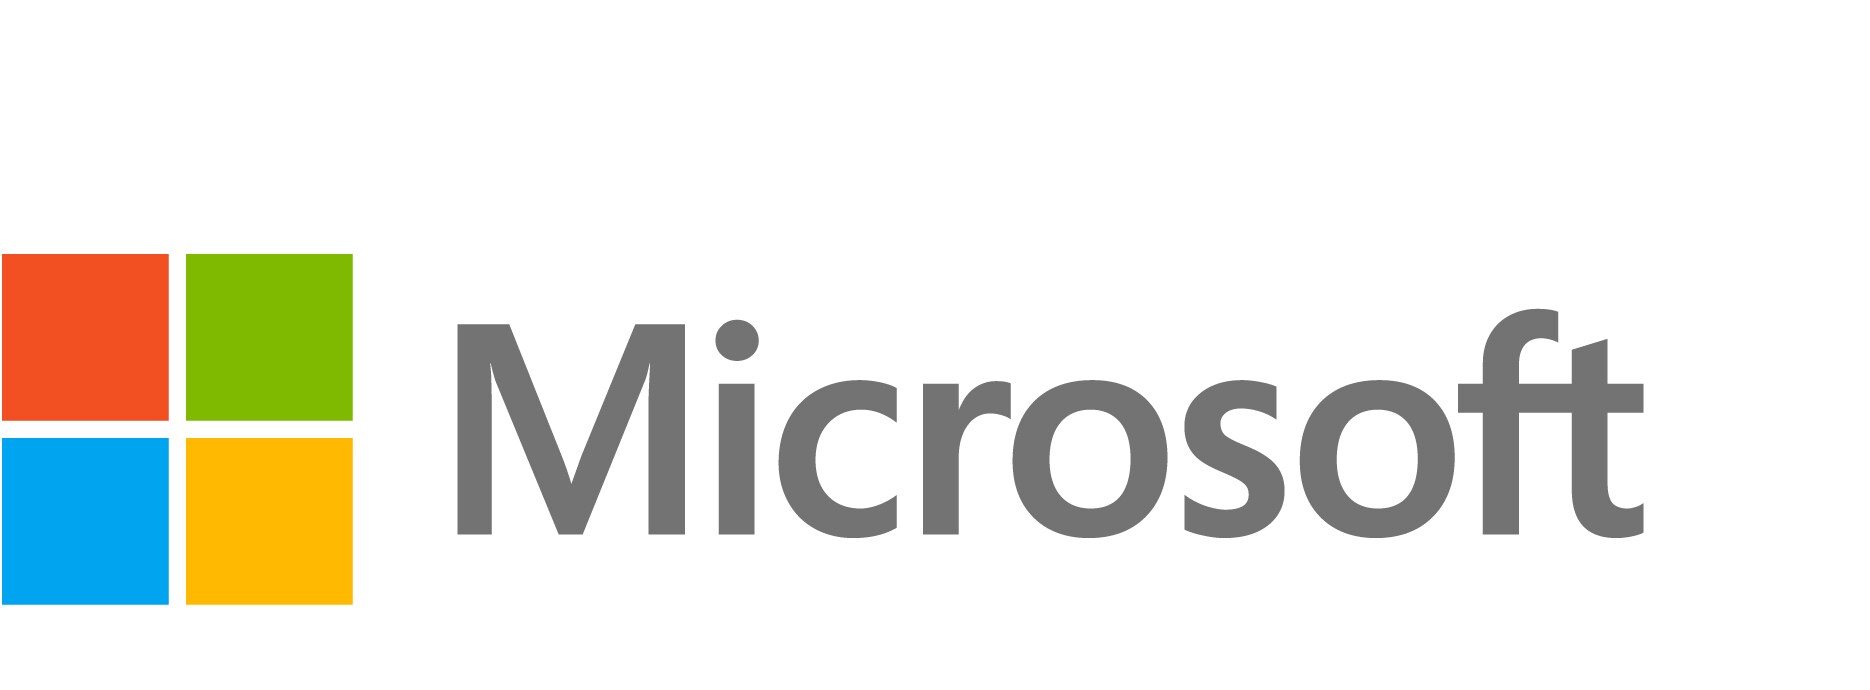 Microsoft Power Pages - subscription license (1 month) - 500 anonymous users per web site